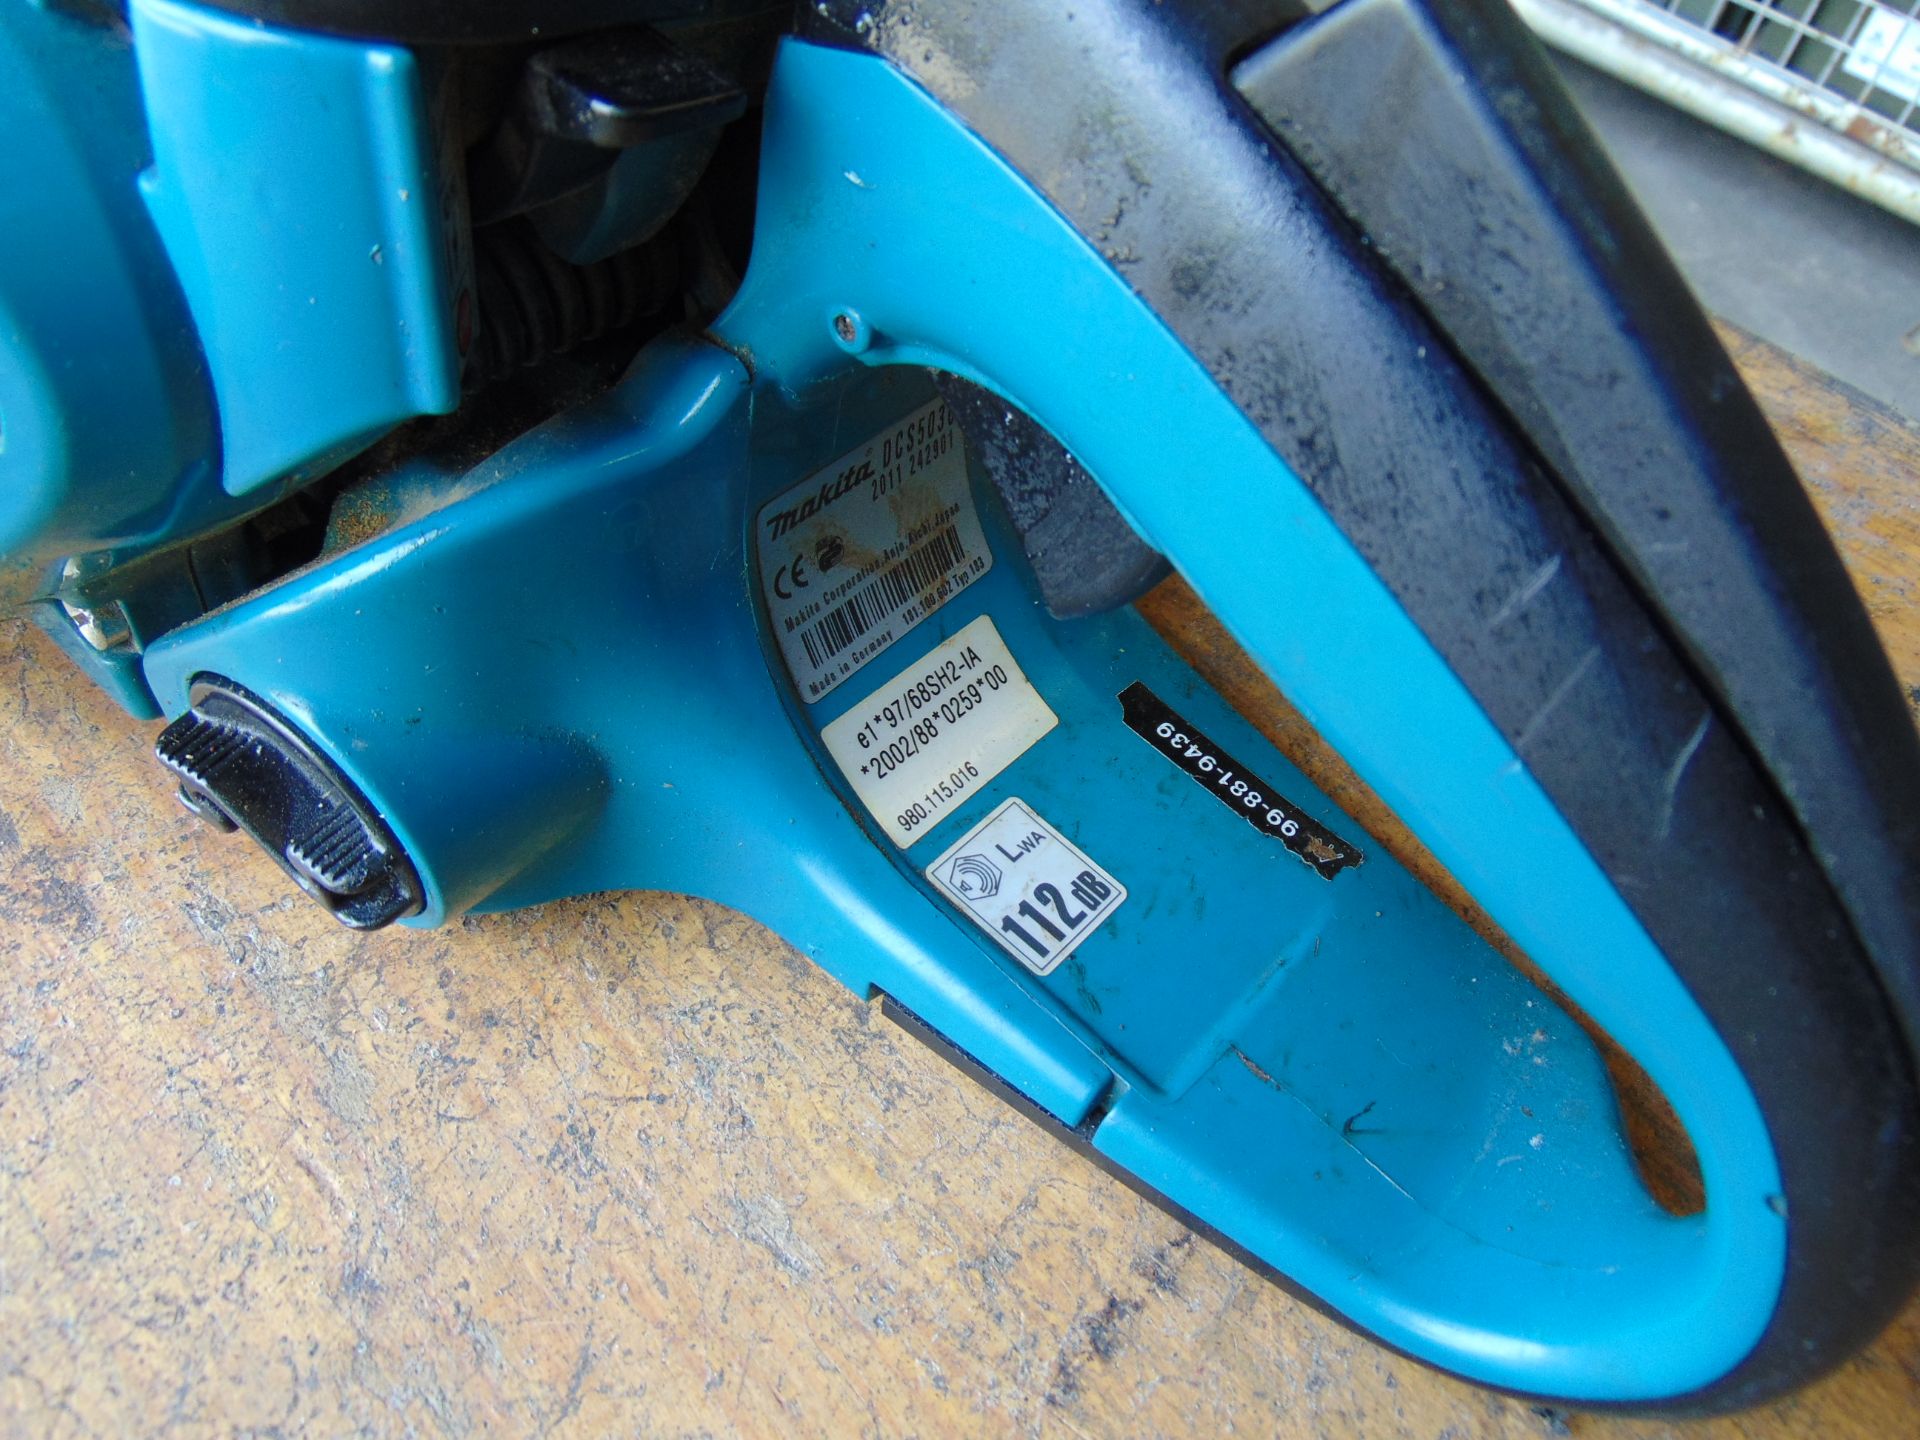 MAKITA DCS 5030 50CC Chainsaw c/w Chain Guard from MoD. - Image 5 of 6